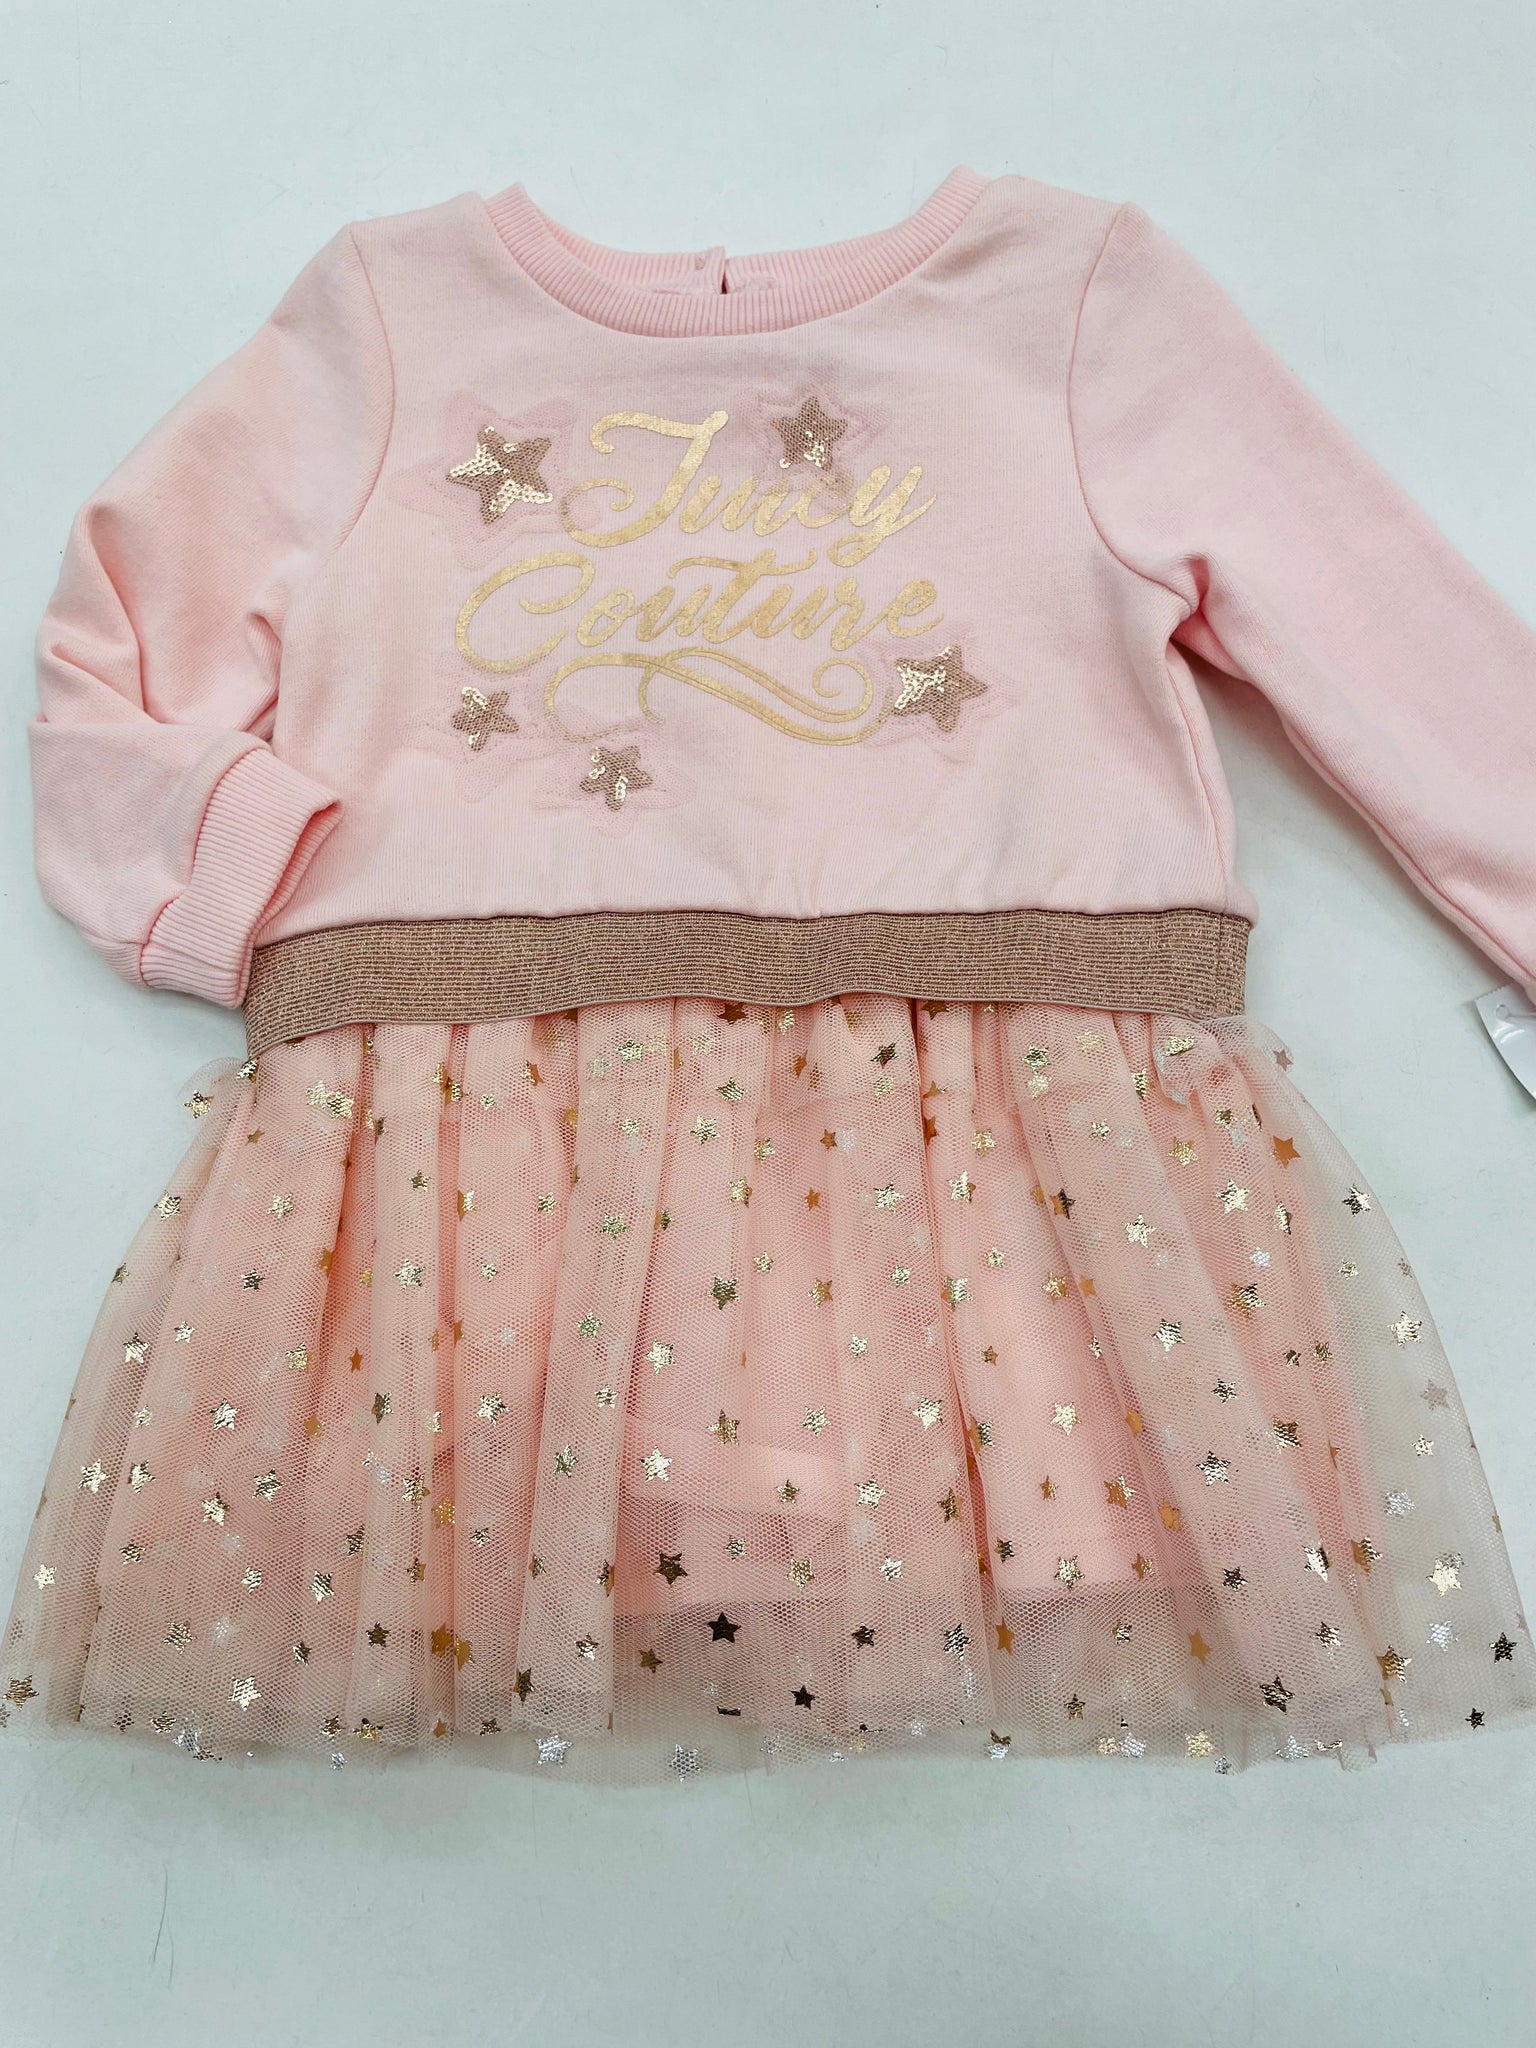 New Infant Girls Juicy Couture Dress 18 months